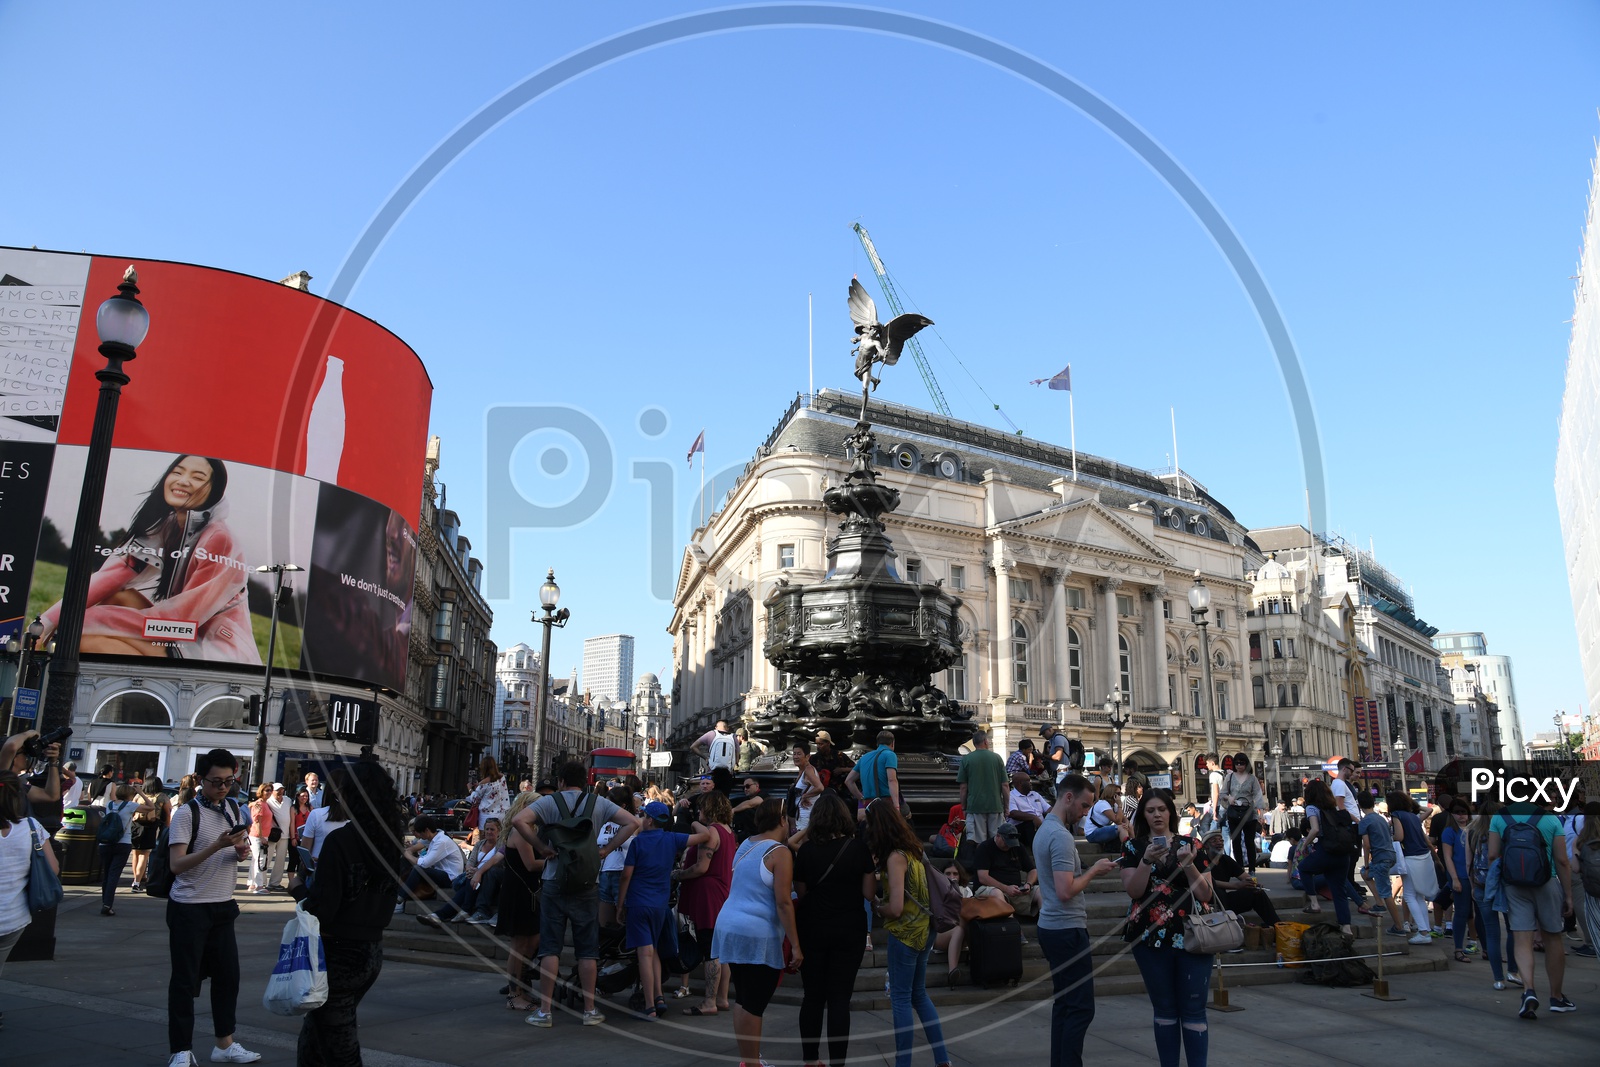 St.James's Street With Busy Crowd In London